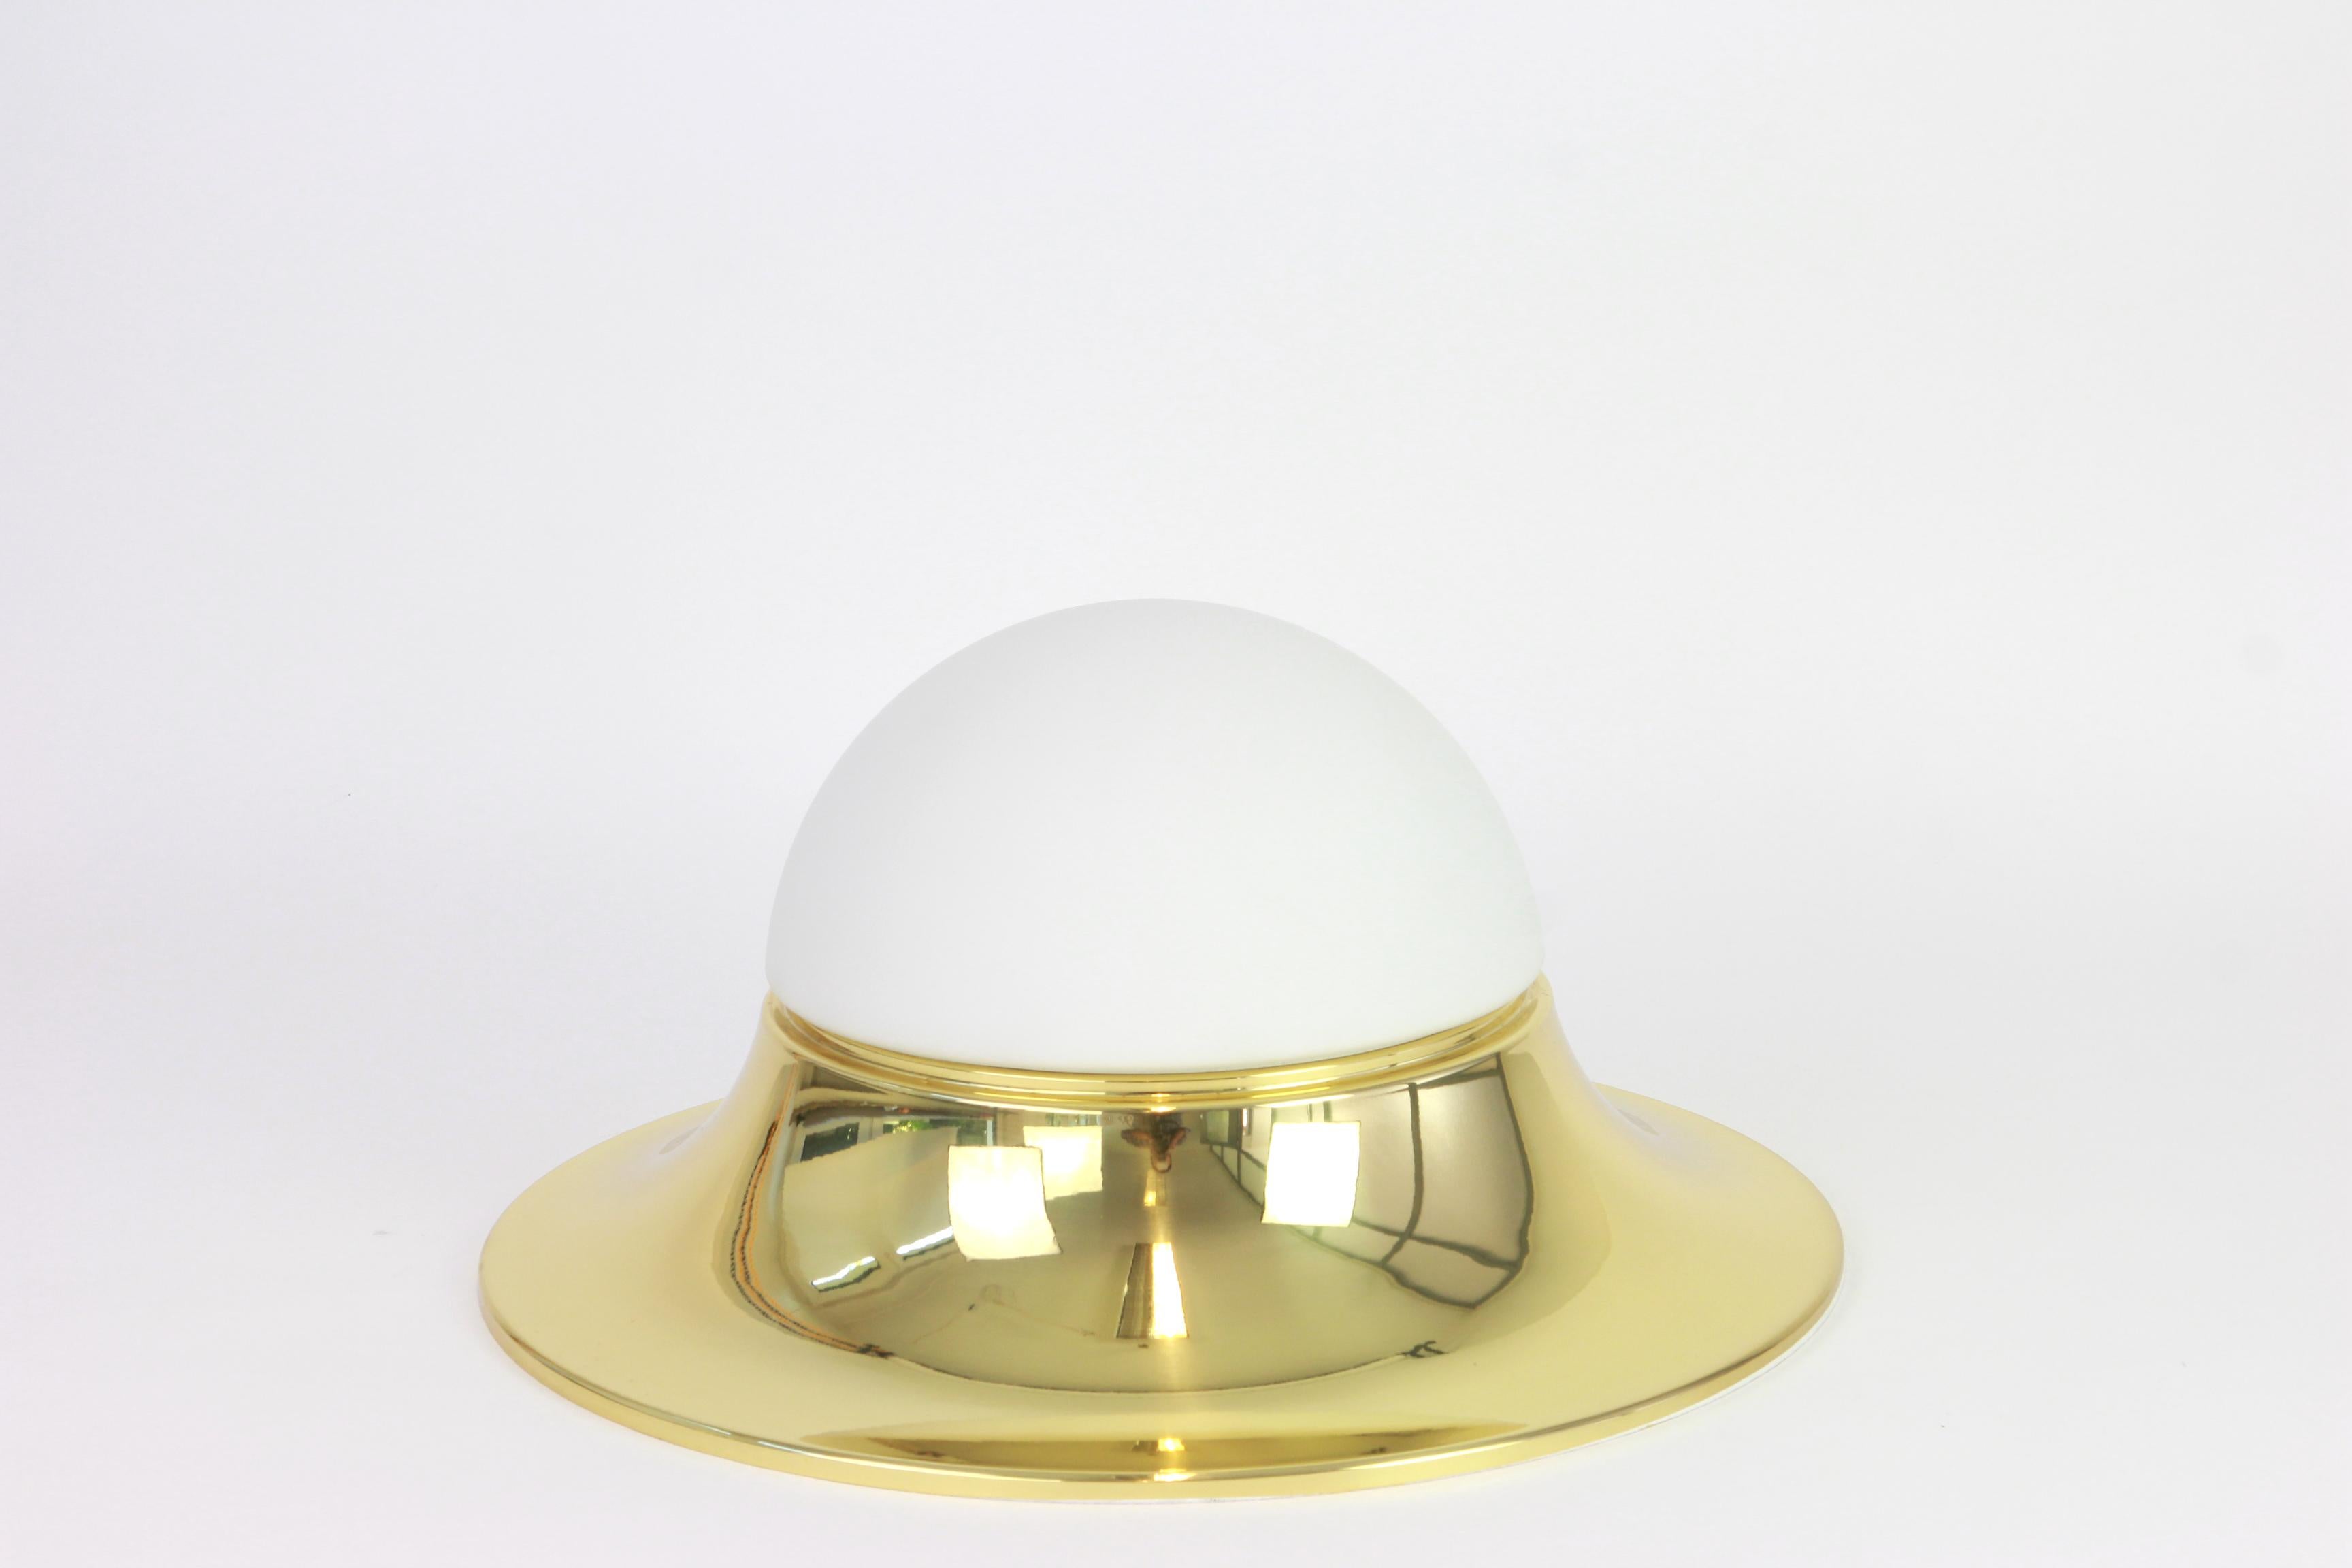 1 of 5 large UFO with brass frame and opal glass flush mounts Limburg, manufactured in Germany, circa 1970s.
High quality and in very good condition. Cleaned, well-wired and ready to use.
The fixture can be used as wall light or ceiling